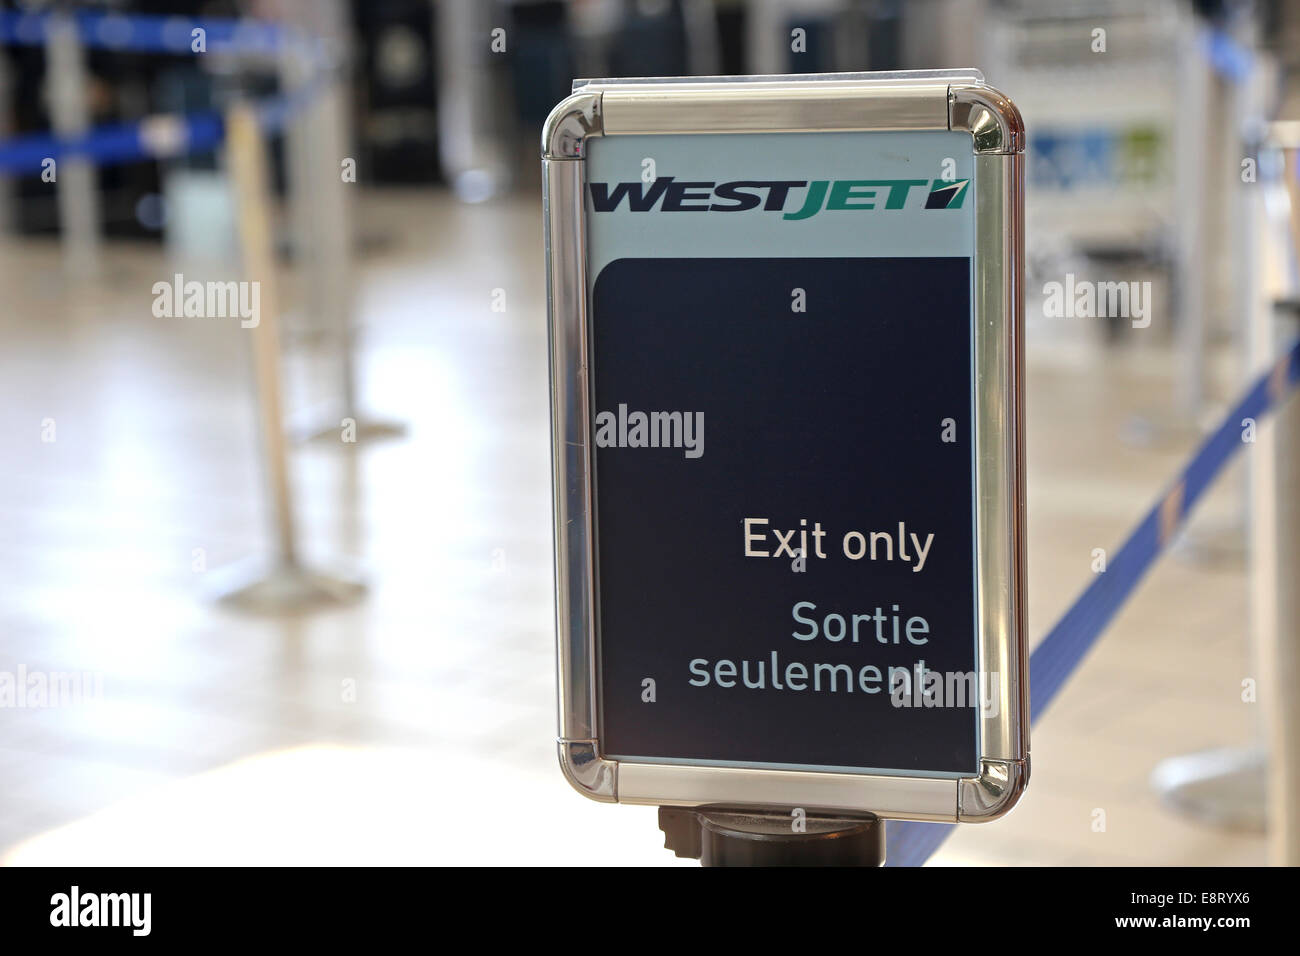 Westjet exit only in an airport Stock Photo